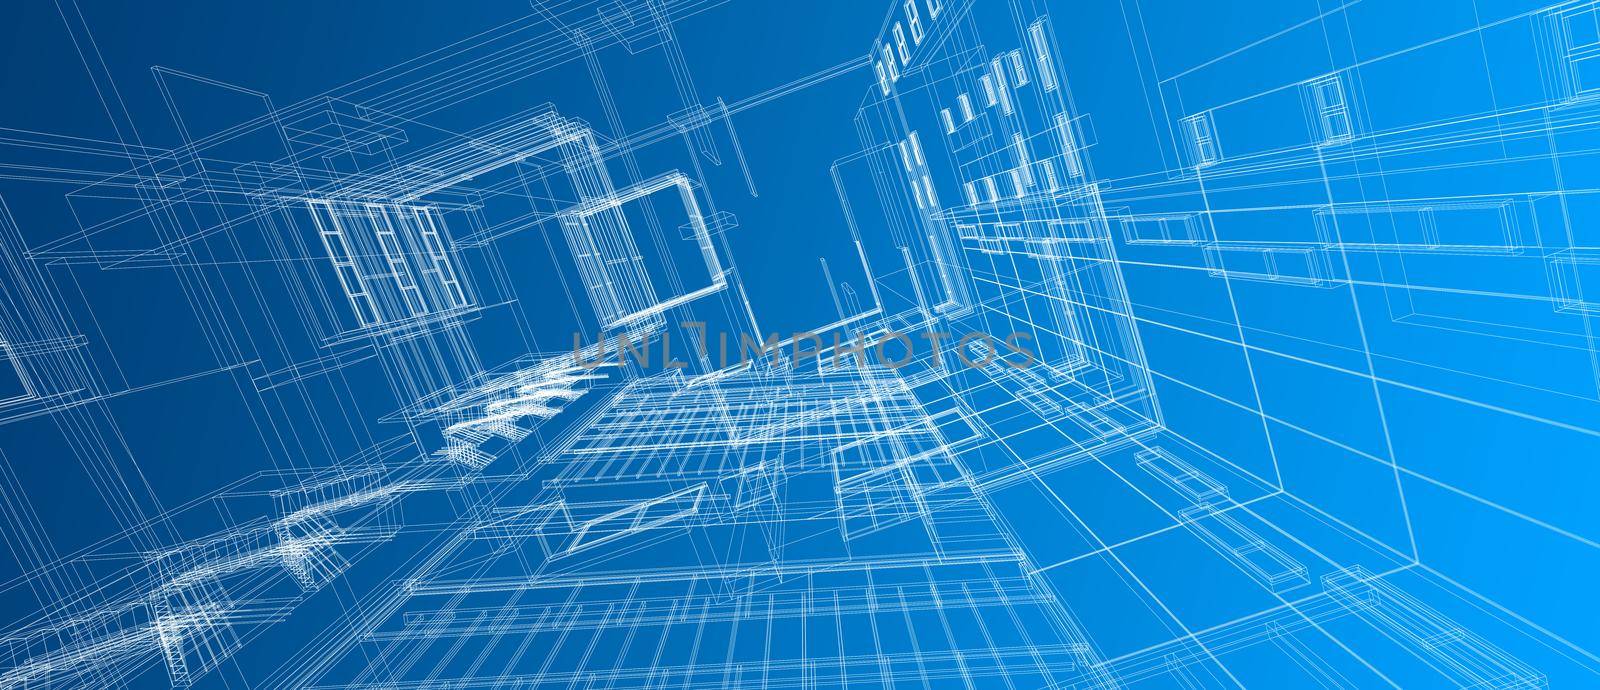 Architecture building space design concept 3d perspective white wire frame rendering gradient blue color background. For abstract background or wallpaper desktops computer technology design architectural theme.